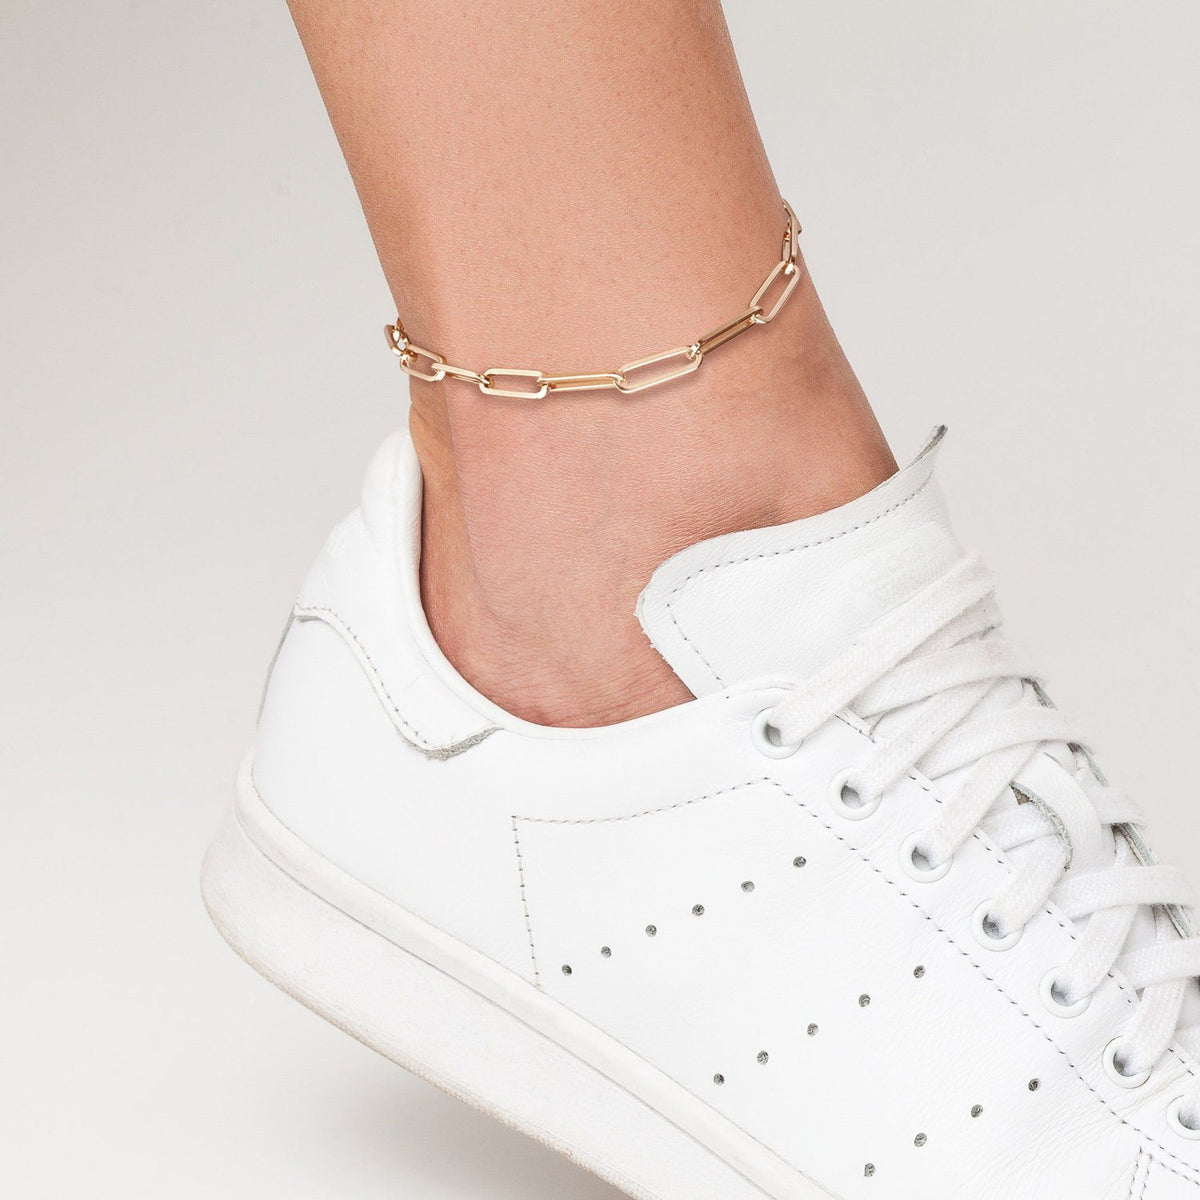 What is the symbolic meaning of wearing anklets? - Quora